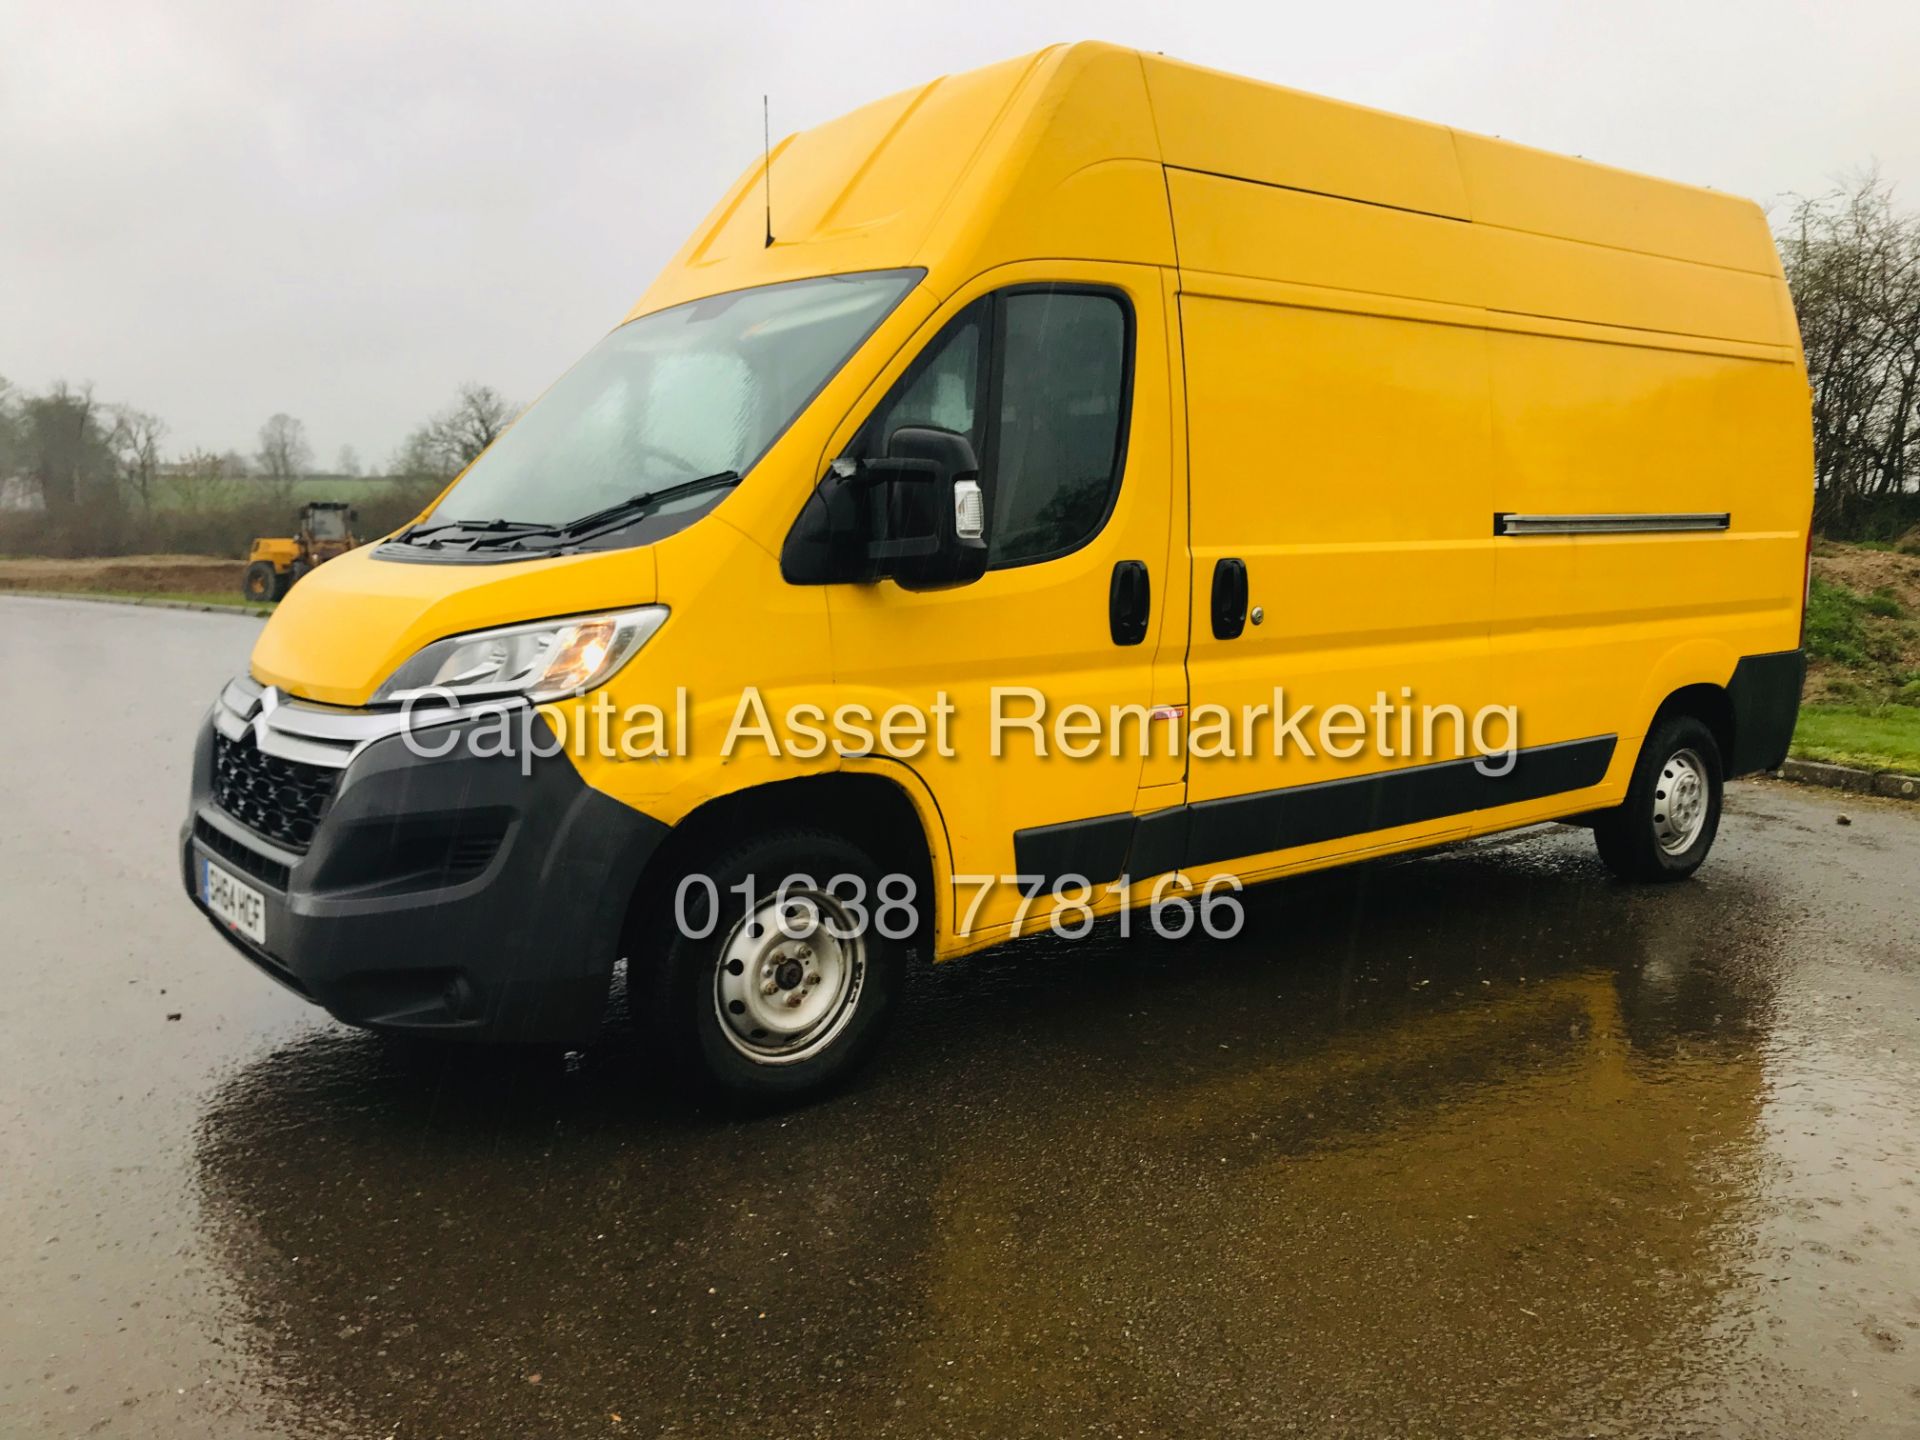 (ON SALE) CITROEN RELAY 2.2HDI LONG WHEEL BASE EXTRA HIGH ROOF - 2015 REG - 1 KEEPER - LOW MILES - Image 3 of 10